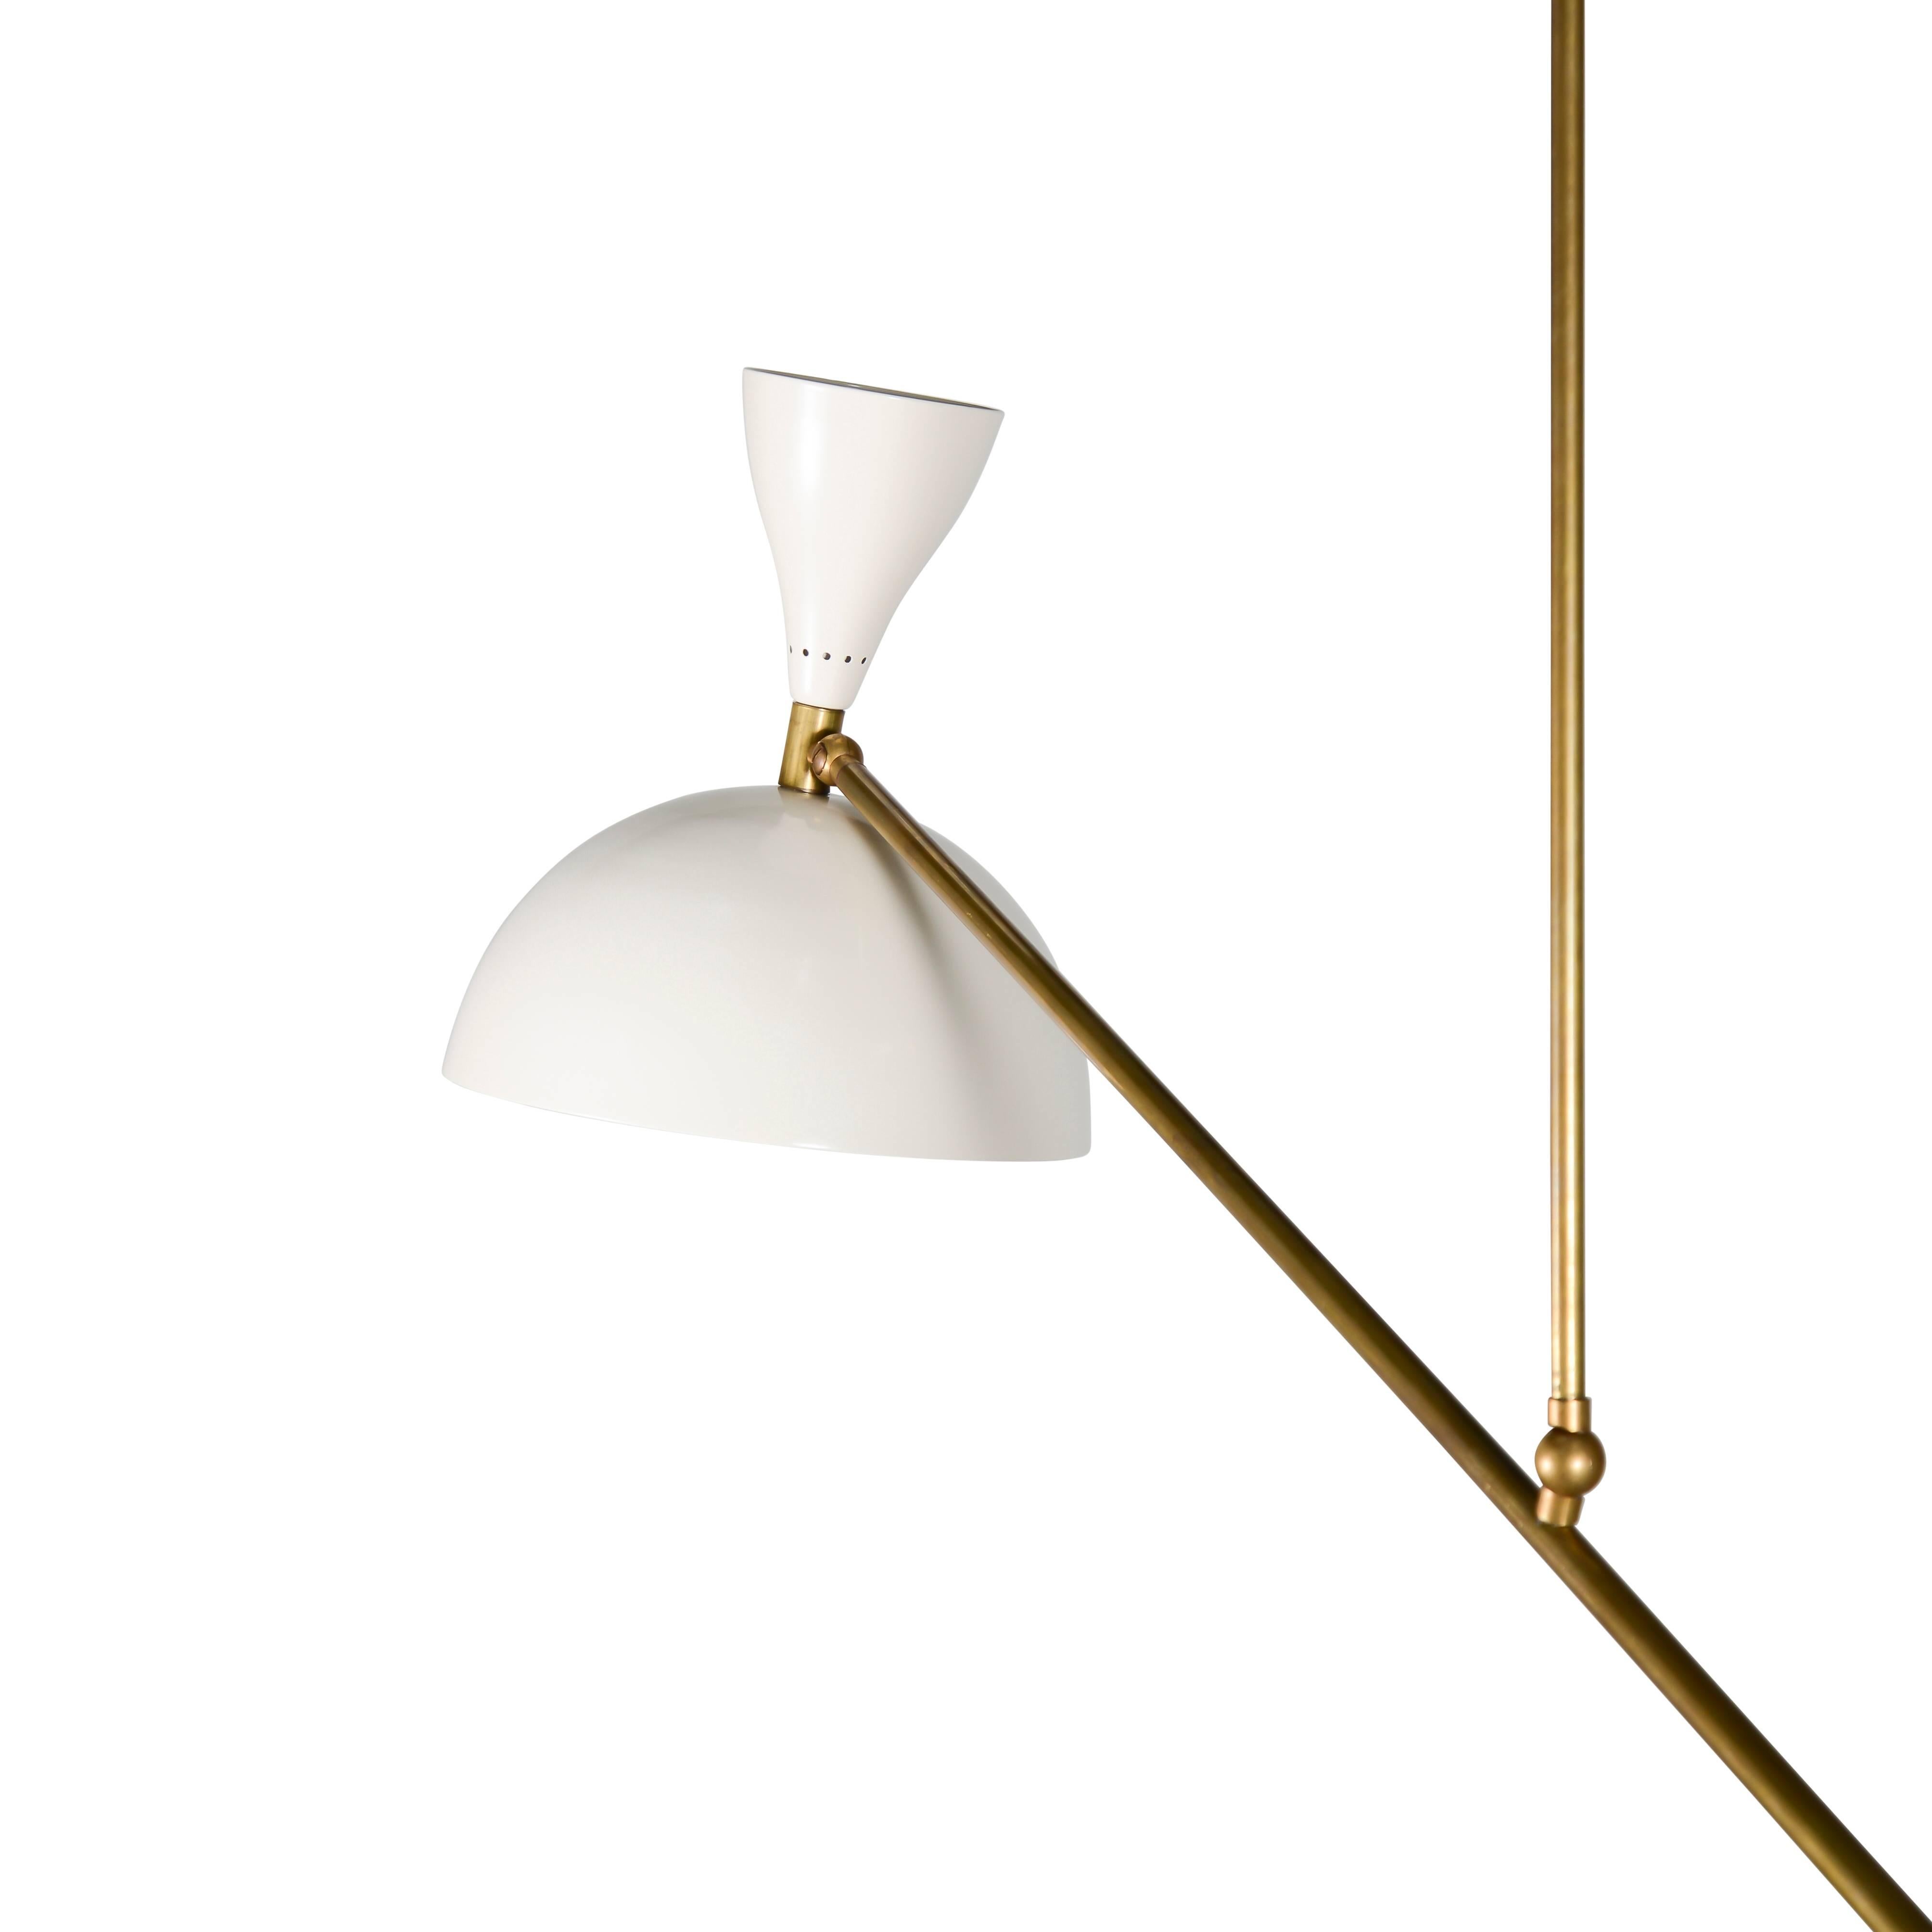 Brass articulating pendant lights with gloss ivory shades and counterbalancing spheres. Two available.